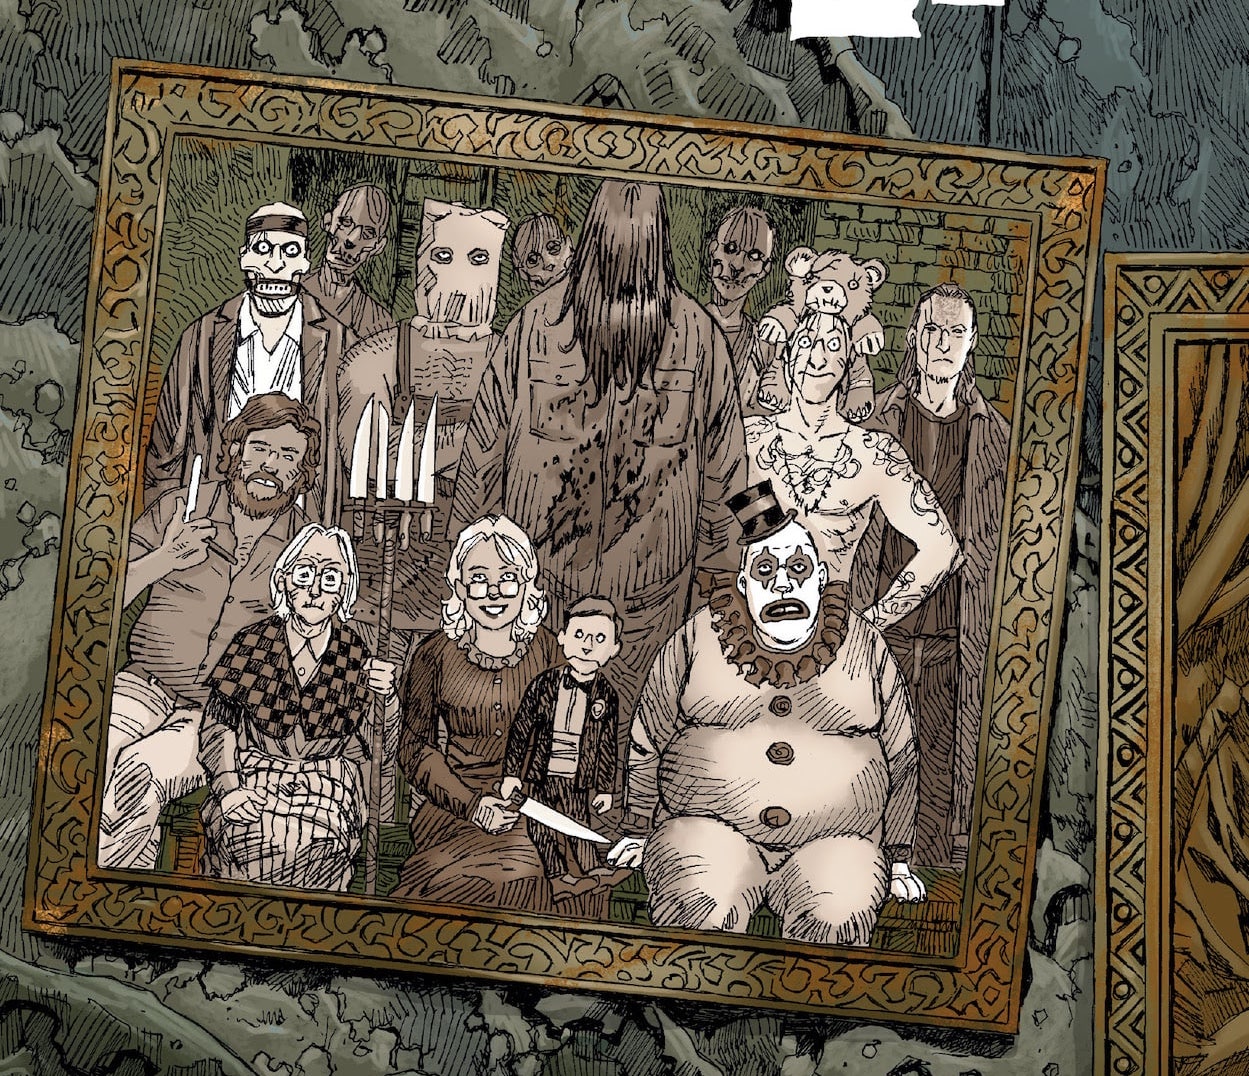 'Where Monsters Lie' #1 is a meta-horror filled with wonderful weirdos